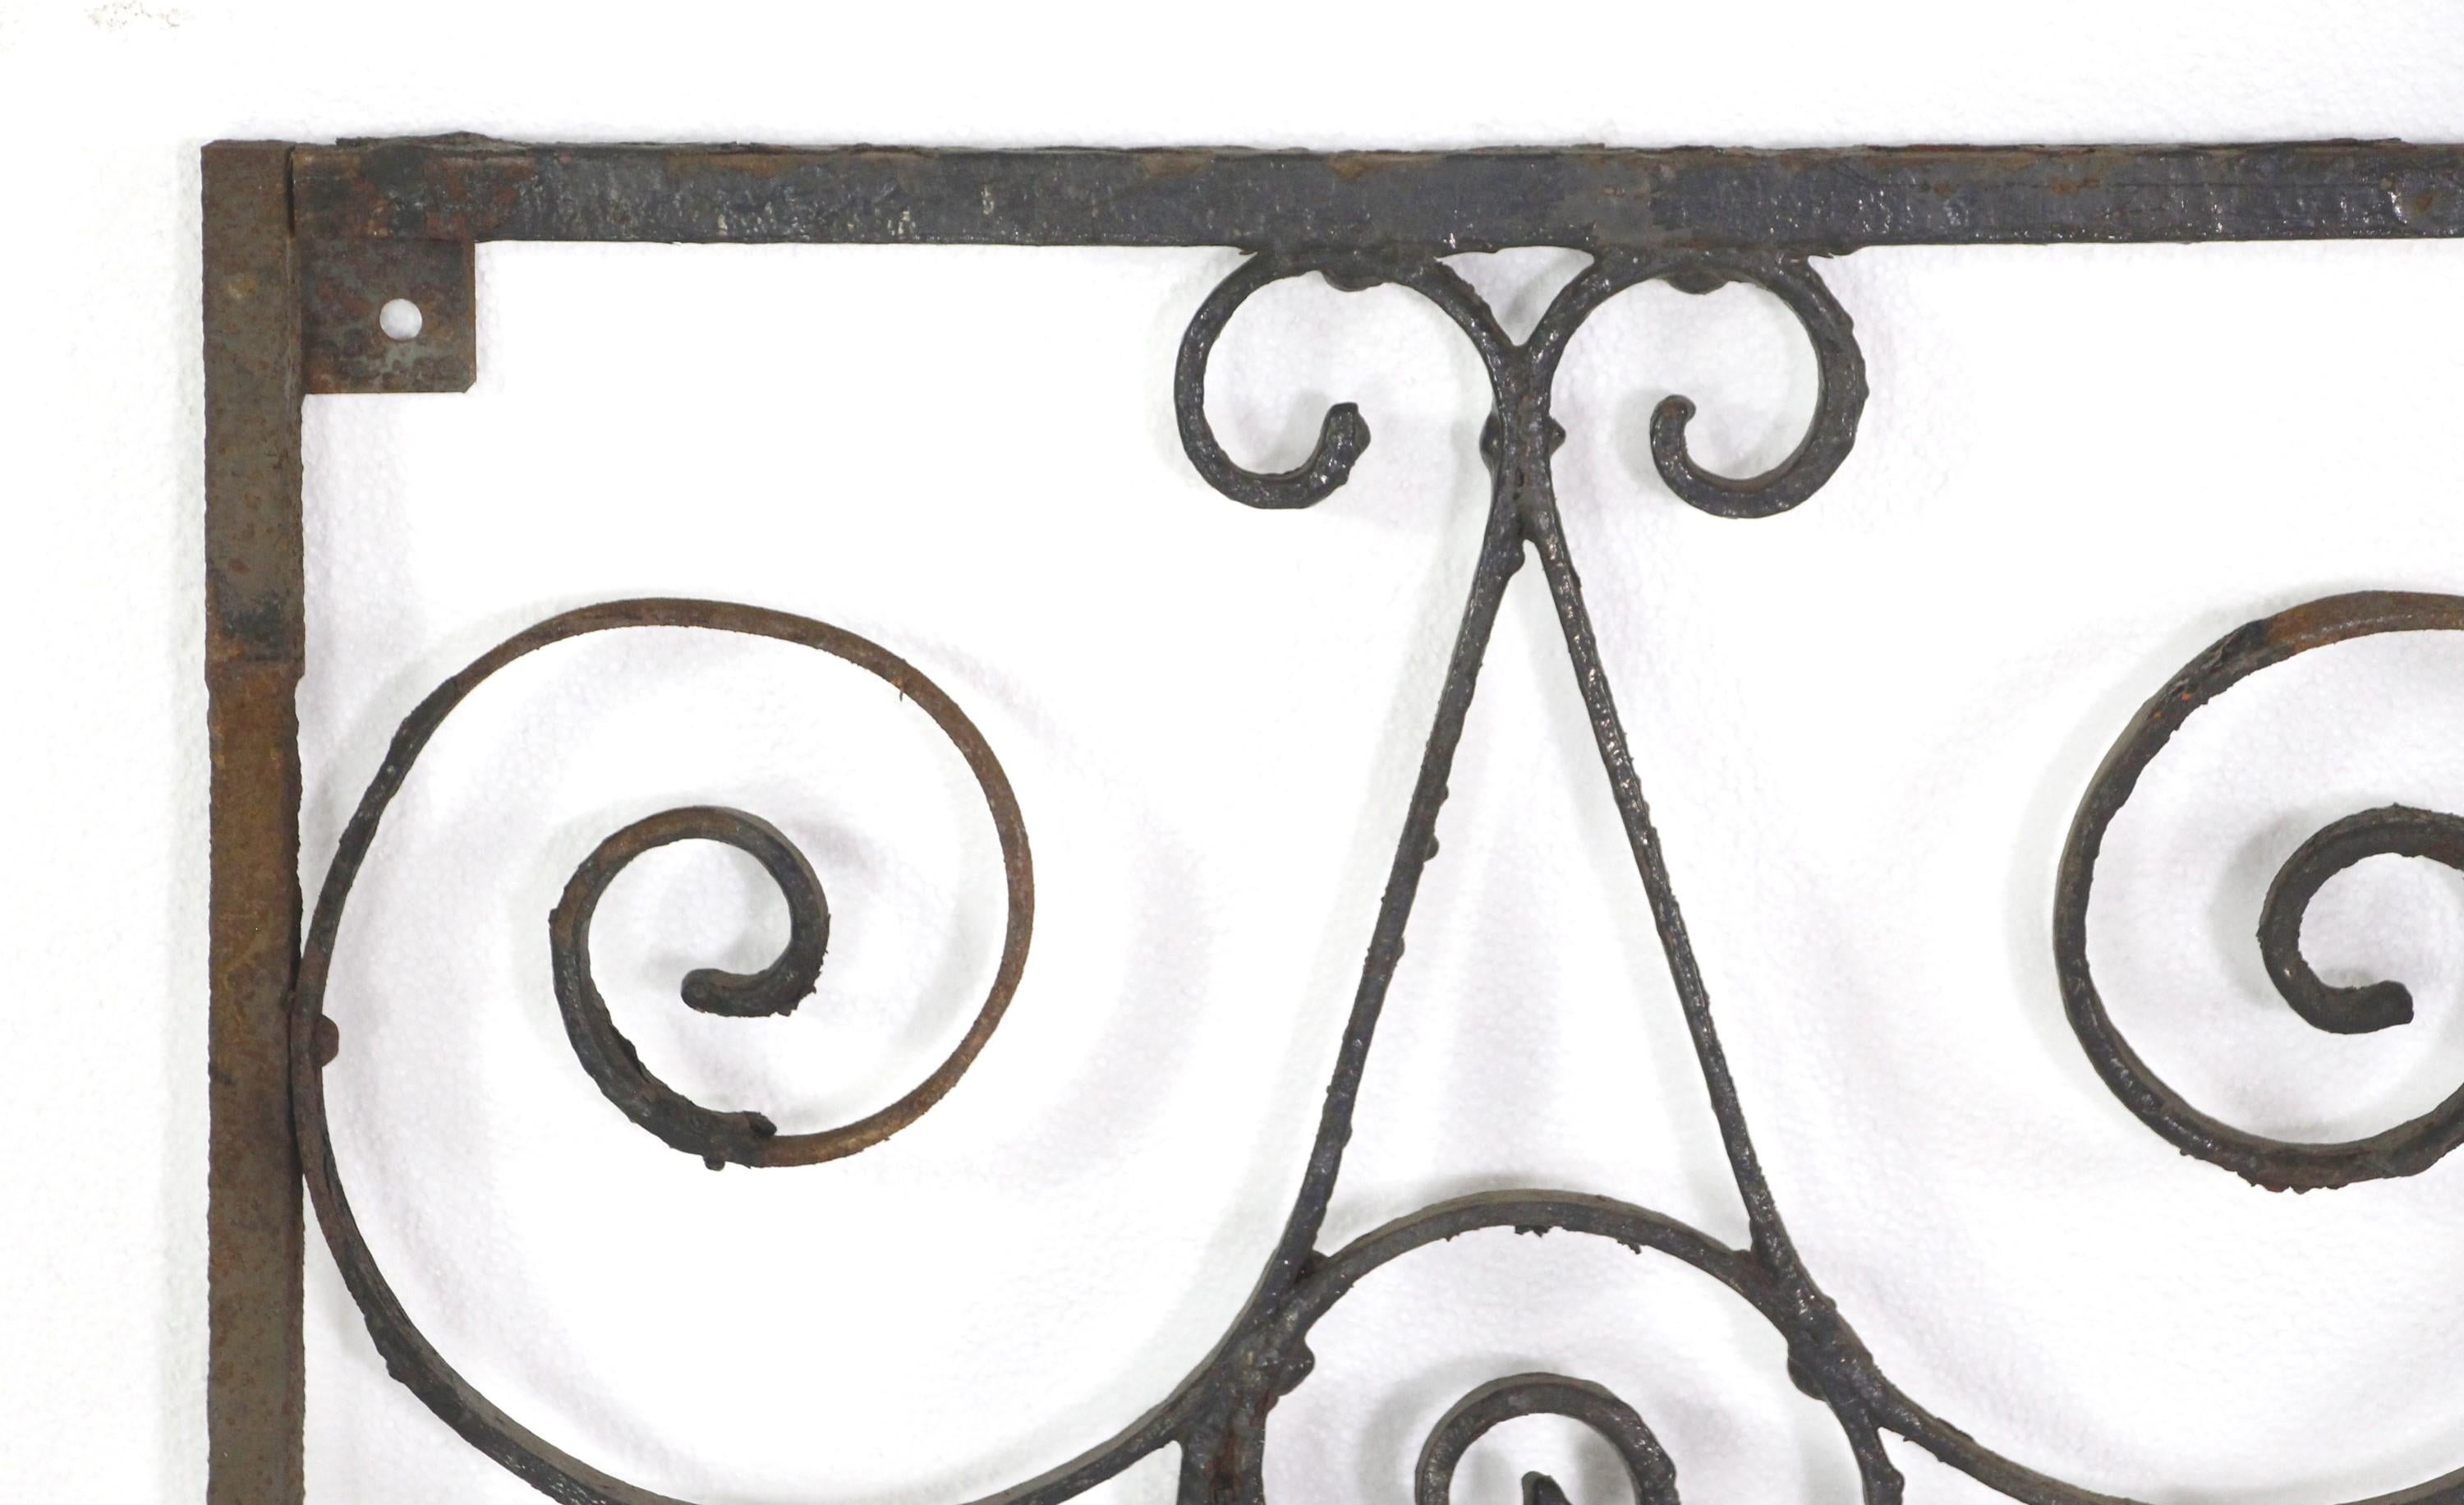 This antique wrought iron gate is hand forged with ornate swirled details and curls. It has a solid frame and is suitable for a gate or a variety of purposes such as a wall ornament or incorporated into a table with a glass top. There is rust from